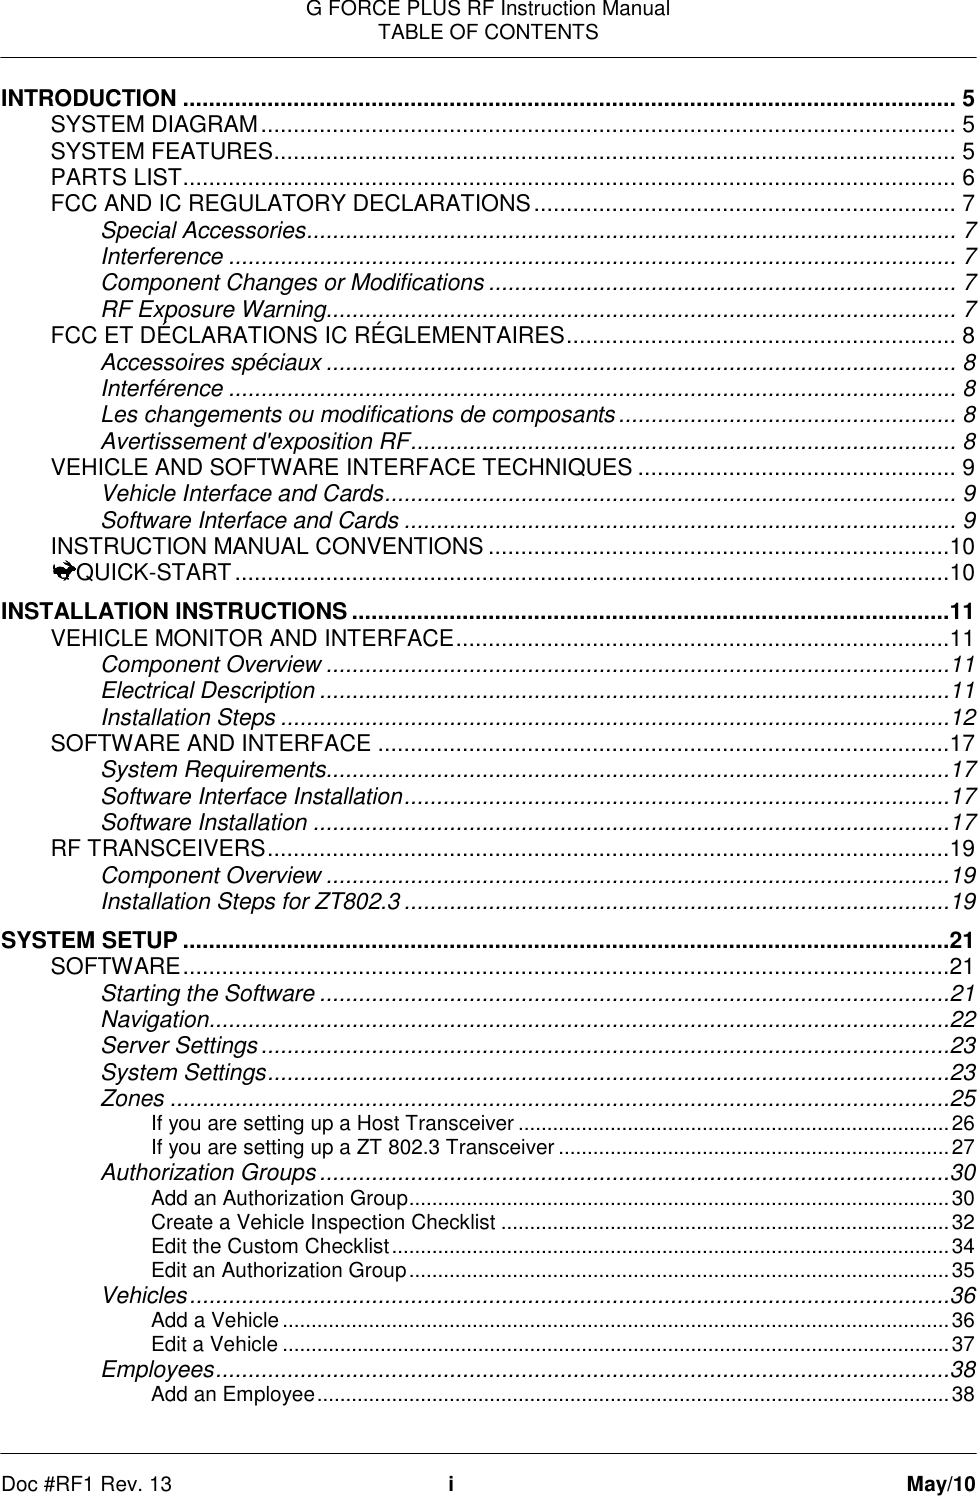 G FORCE PLUS RF Instruction Manual TABLE OF CONTENTS   Doc #RF1 Rev. 13  i  May/10 INTRODUCTION ....................................................................................................................... 5 SYSTEM DIAGRAM ........................................................................................................... 5 SYSTEM FEATURES ......................................................................................................... 5 PARTS LIST ....................................................................................................................... 6 FCC AND IC REGULATORY DECLARATIONS ................................................................. 7 Special Accessories .................................................................................................... 7 Interference ................................................................................................................ 7 Component Changes or Modifications ........................................................................ 7 RF Exposure Warning................................................................................................. 7 FCC ET DÉCLARATIONS IC RÉGLEMENTAIRES ............................................................ 8 Accessoires spéciaux ................................................................................................. 8 Interférence ................................................................................................................ 8 Les changements ou modifications de composants .................................................... 8 Avertissement d&apos;exposition RF .................................................................................... 8 VEHICLE AND SOFTWARE INTERFACE TECHNIQUES ................................................. 9 Vehicle Interface and Cards ........................................................................................ 9 Software Interface and Cards ..................................................................................... 9 INSTRUCTION MANUAL CONVENTIONS .......................................................................10 QUICK-START ..............................................................................................................10 INSTALLATION INSTRUCTIONS ............................................................................................11 VEHICLE MONITOR AND INTERFACE ............................................................................11 Component Overview ................................................................................................11 Electrical Description .................................................................................................11 Installation Steps .......................................................................................................12 SOFTWARE AND INTERFACE ........................................................................................17 System Requirements................................................................................................17 Software Interface Installation ....................................................................................17 Software Installation ..................................................................................................17 RF TRANSCEIVERS .........................................................................................................19 Component Overview ................................................................................................19 Installation Steps for ZT802.3 ....................................................................................19 SYSTEM SETUP ......................................................................................................................21 SOFTWARE ......................................................................................................................21 Starting the Software .................................................................................................21 Navigation ..................................................................................................................22 Server Settings ..........................................................................................................23 System Settings .........................................................................................................23 Zones ........................................................................................................................25 If you are setting up a Host Transceiver ........................................................................... 26 If you are setting up a ZT 802.3 Transceiver .................................................................... 27 Authorization Groups .................................................................................................30 Add an Authorization Group .............................................................................................. 30 Create a Vehicle Inspection Checklist .............................................................................. 32 Edit the Custom Checklist ................................................................................................. 34 Edit an Authorization Group .............................................................................................. 35 Vehicles .....................................................................................................................36 Add a Vehicle .................................................................................................................... 36 Edit a Vehicle .................................................................................................................... 37 Employees .................................................................................................................38 Add an Employee .............................................................................................................. 38 